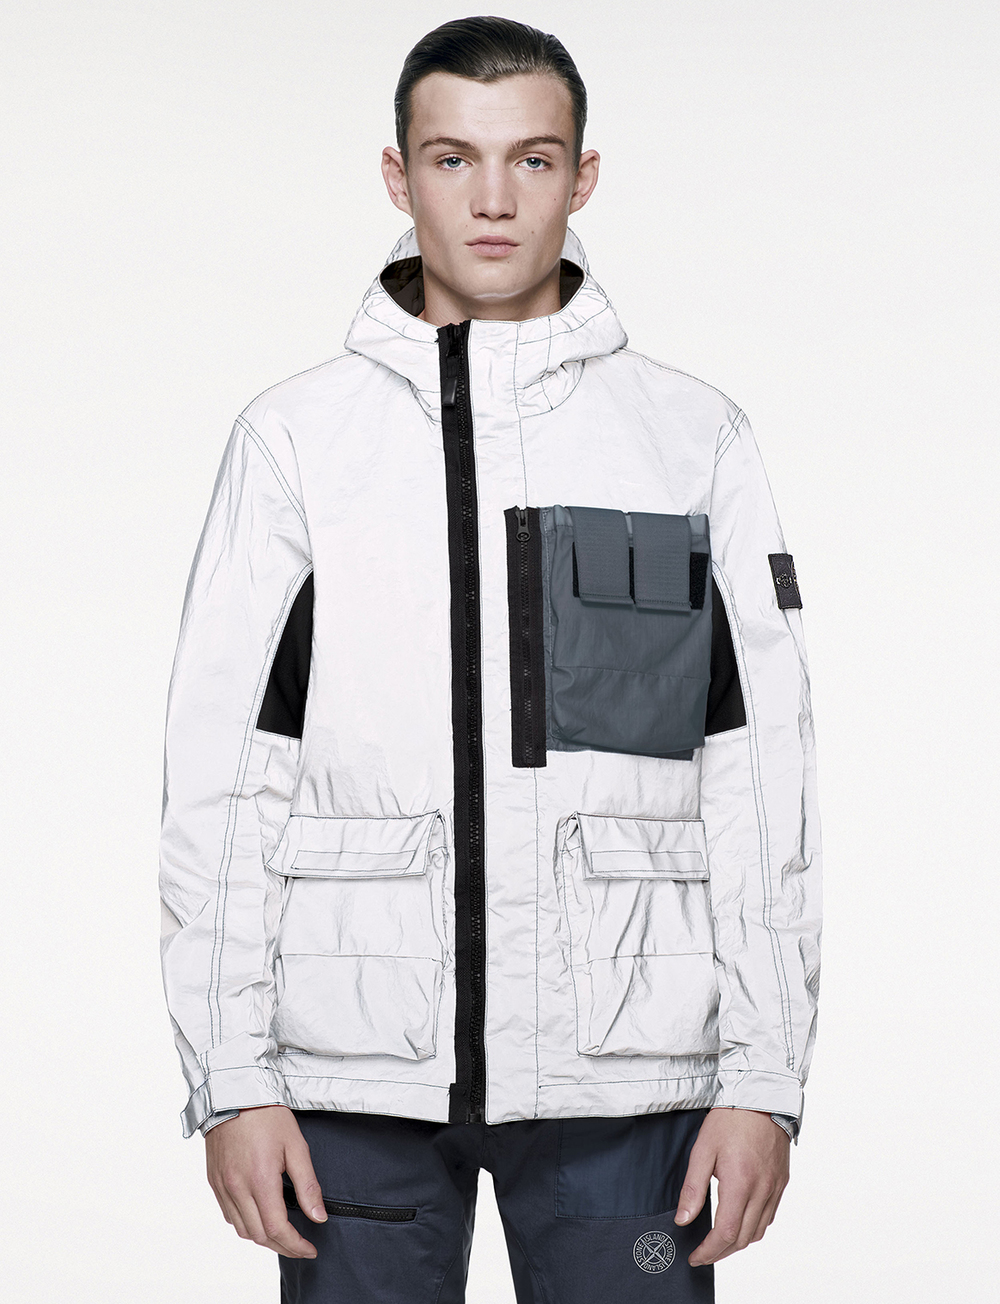 Stone Island Release Activewear References For Spring/Summer 2017 ...